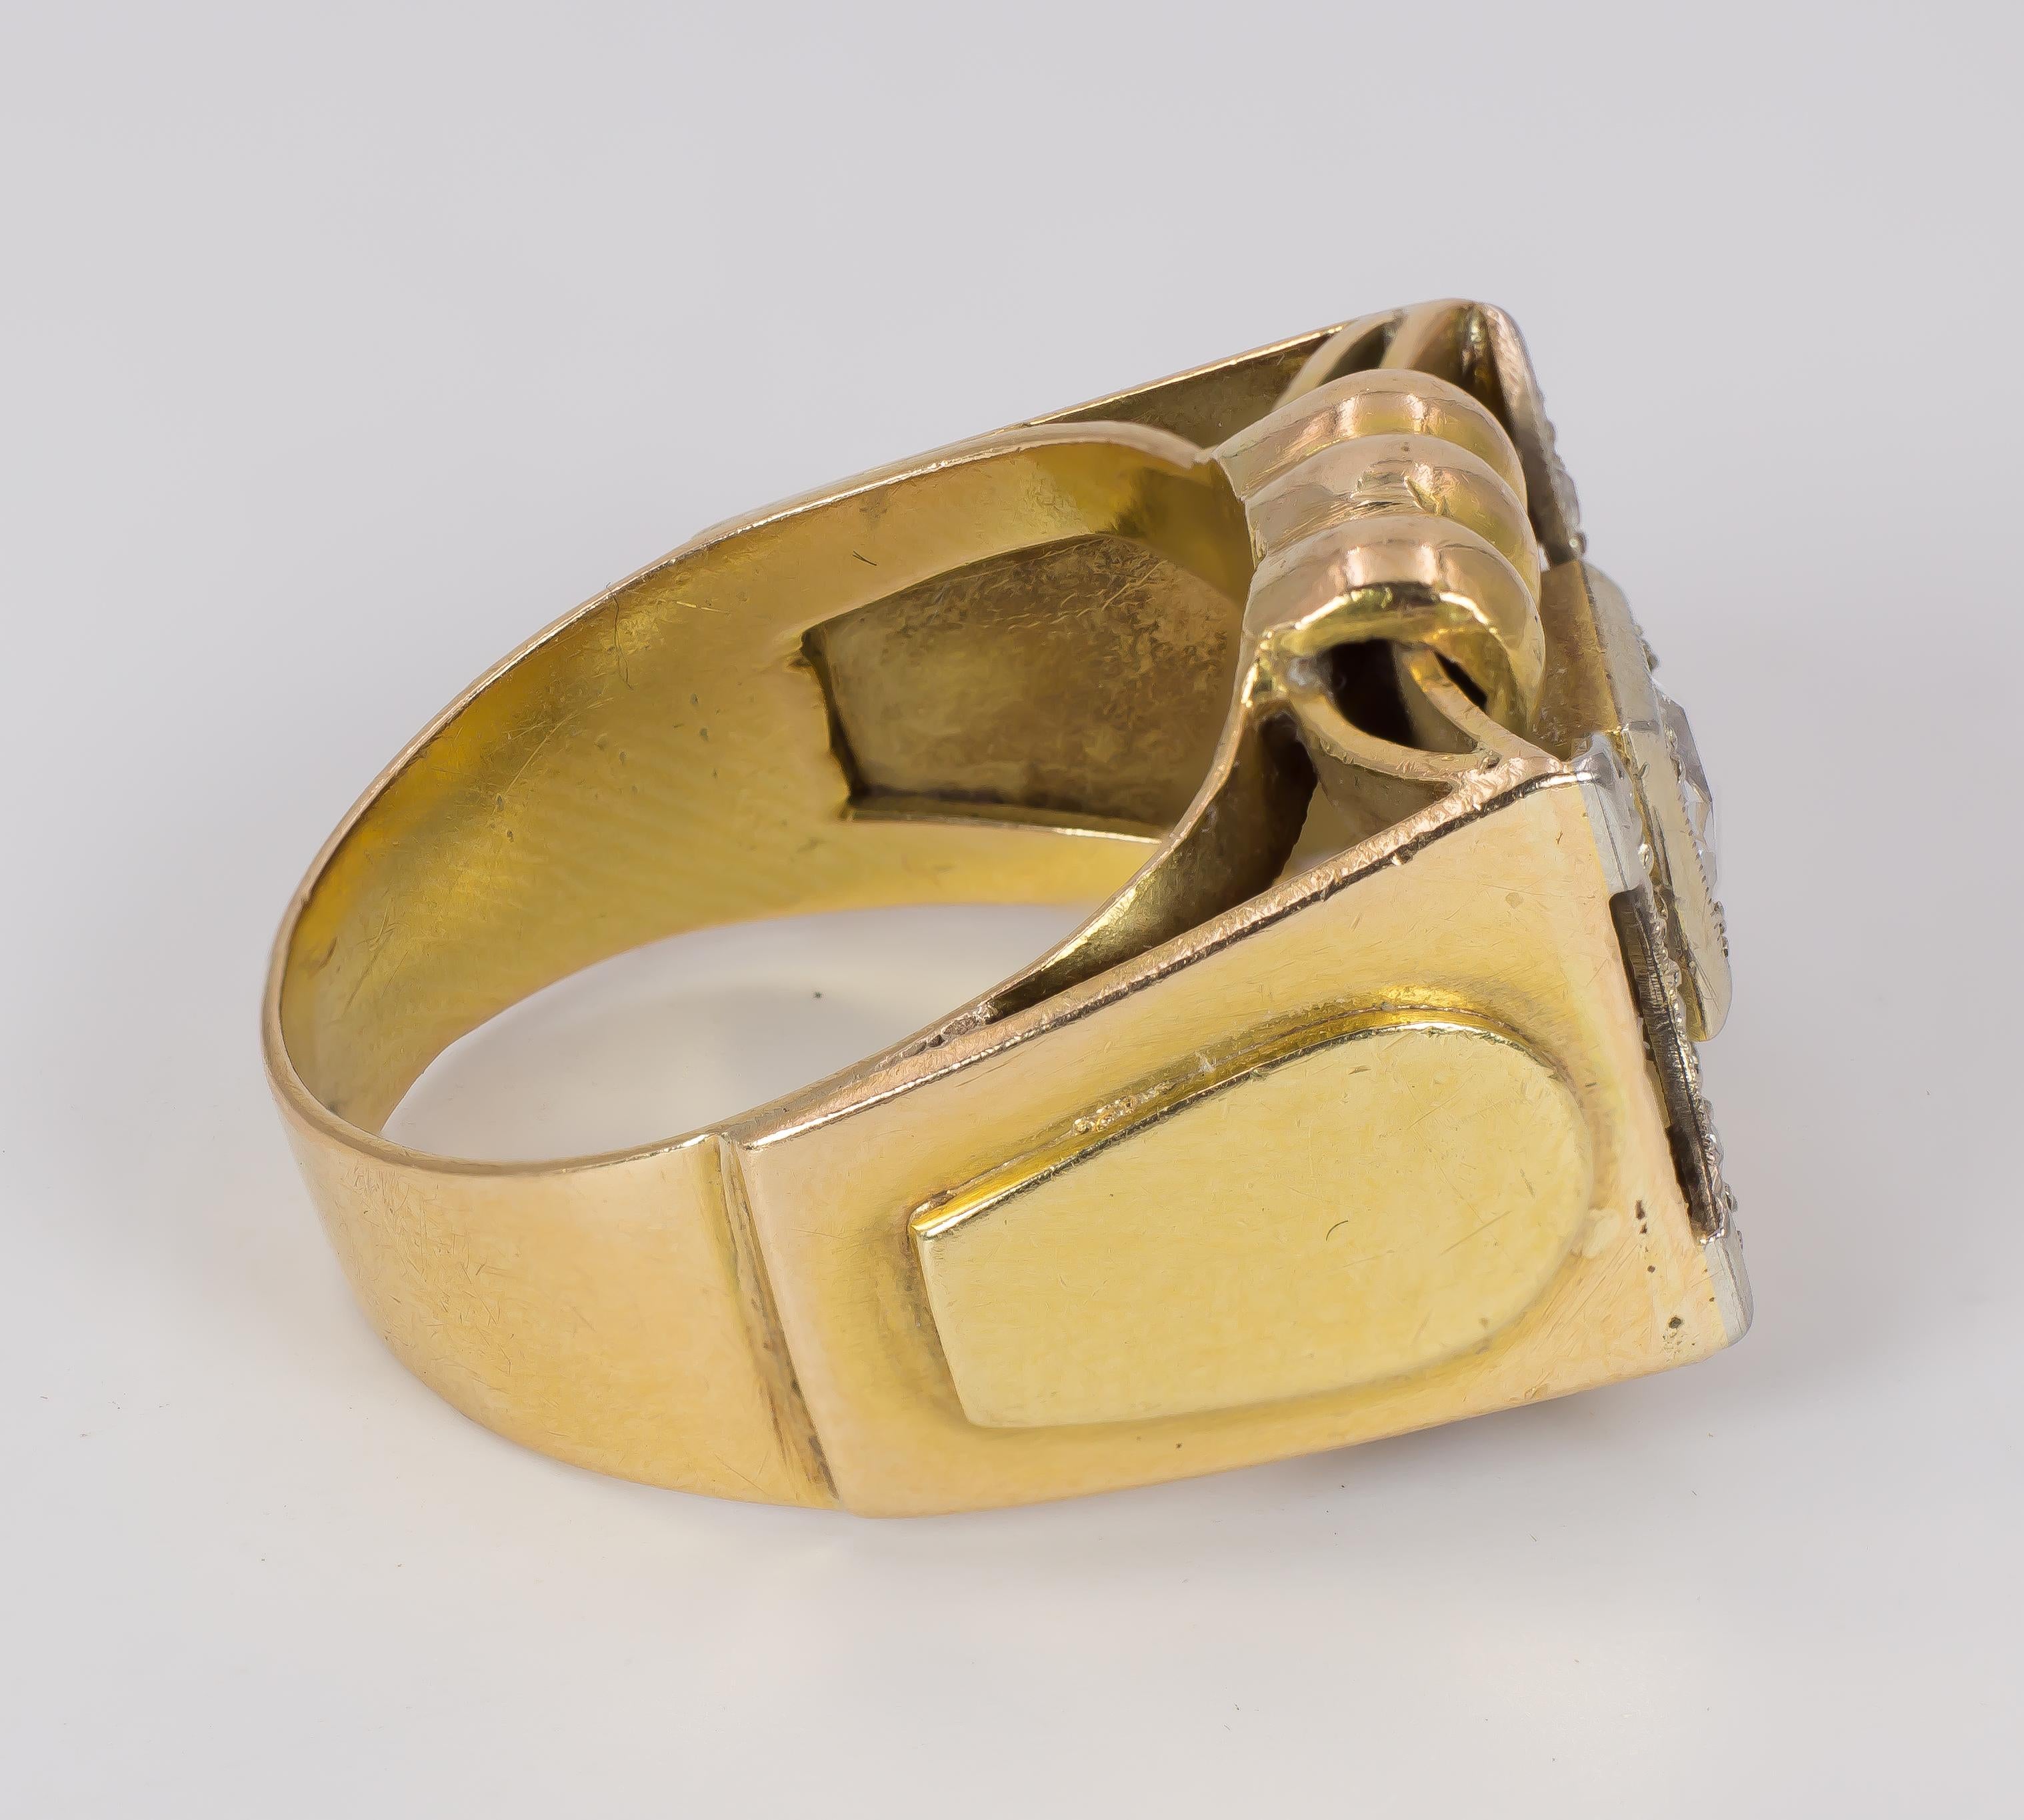 Rose Cut Antique 18 Karat Gold and Diamond Ring, 1930s-1940s For Sale